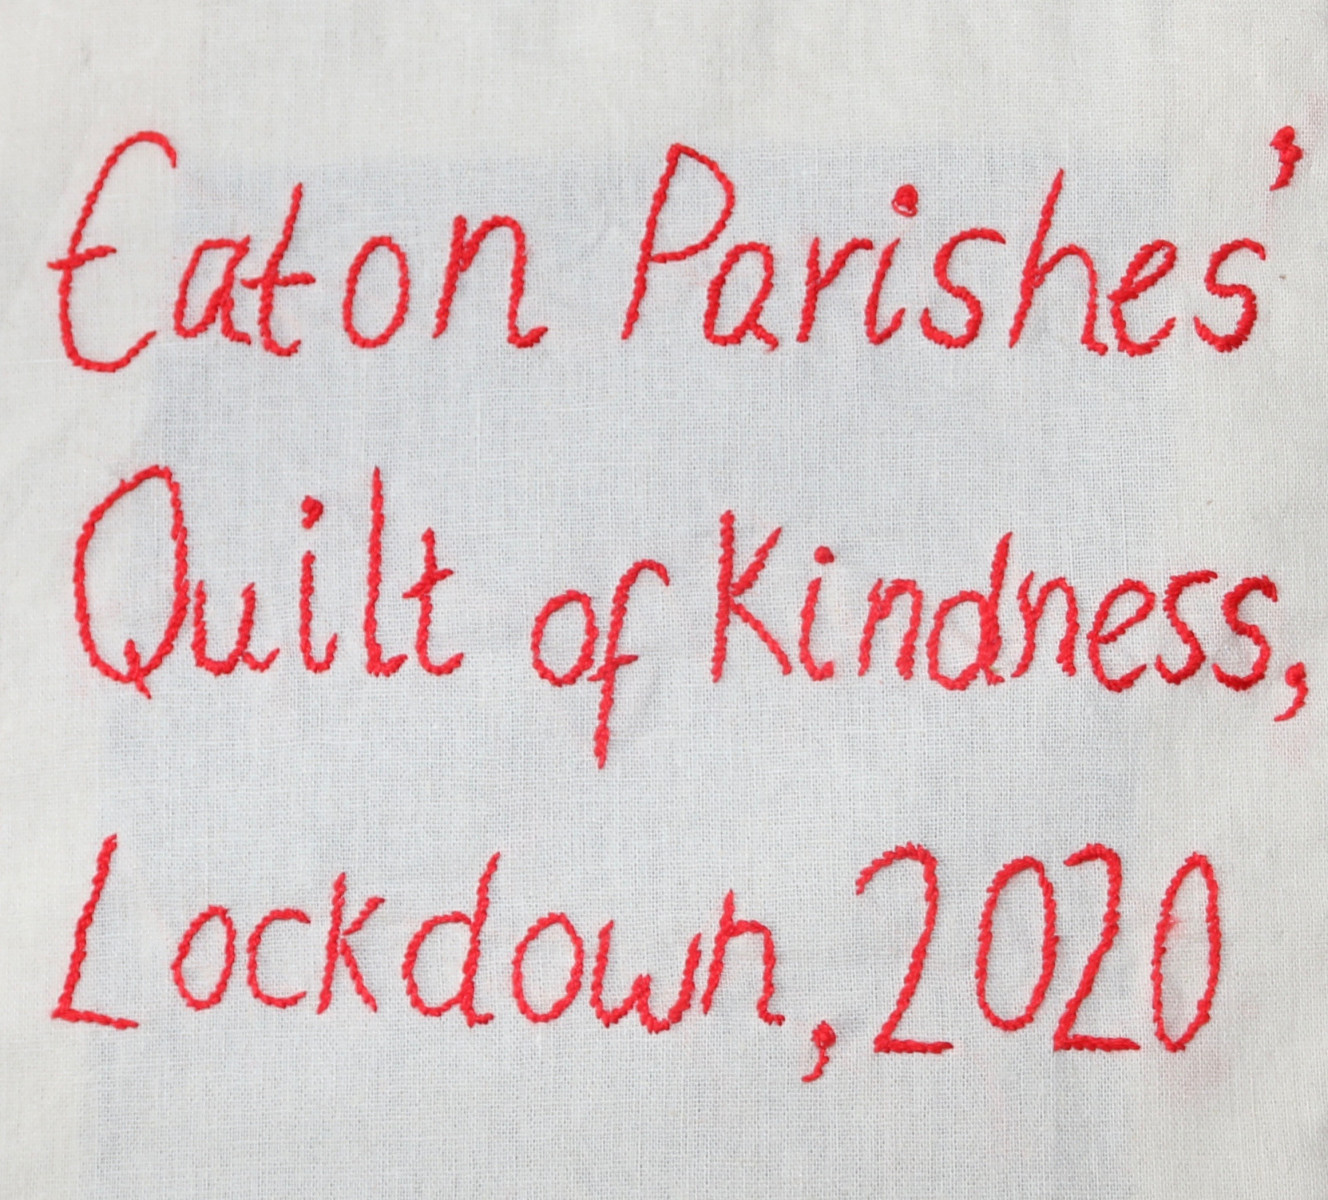 Eaton Parishes' Quilt of Kindness, Lockdown, 2020